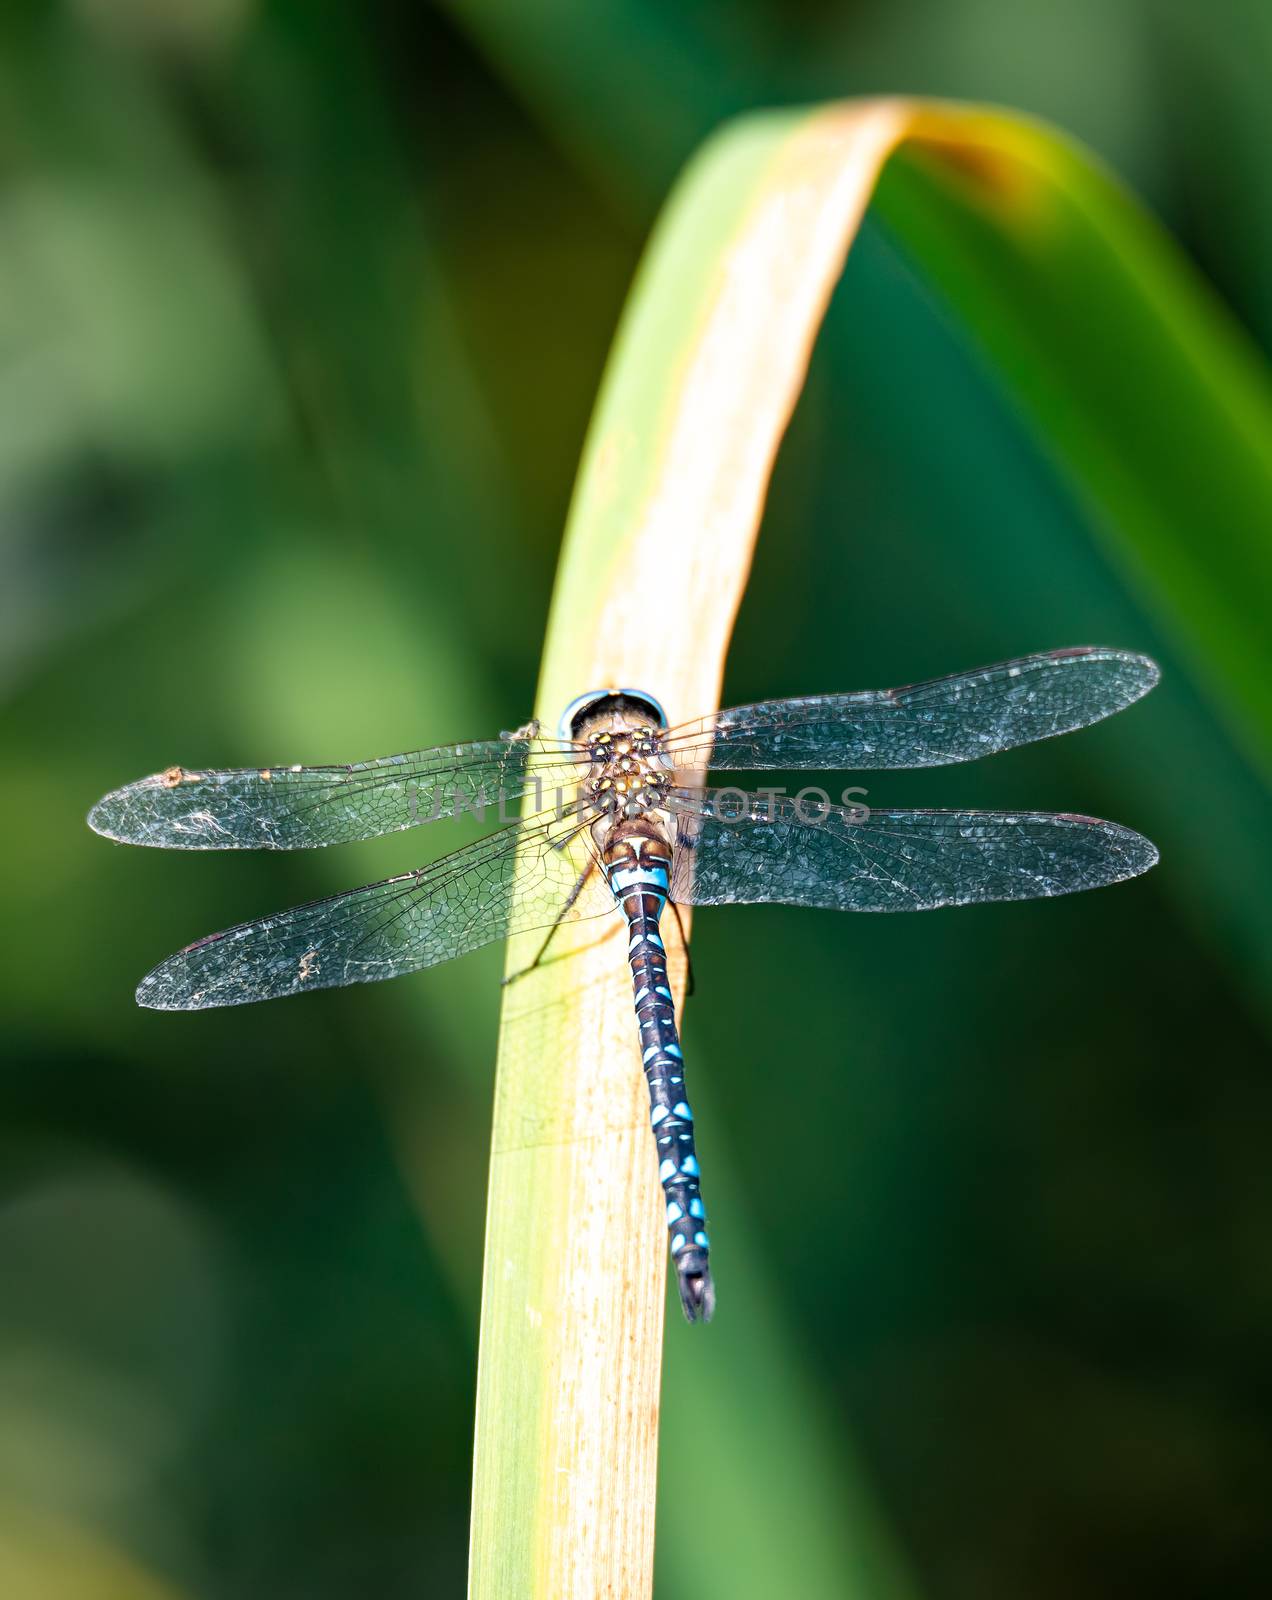 dragonfly, Aeshna cyanea, insect in natural by artush